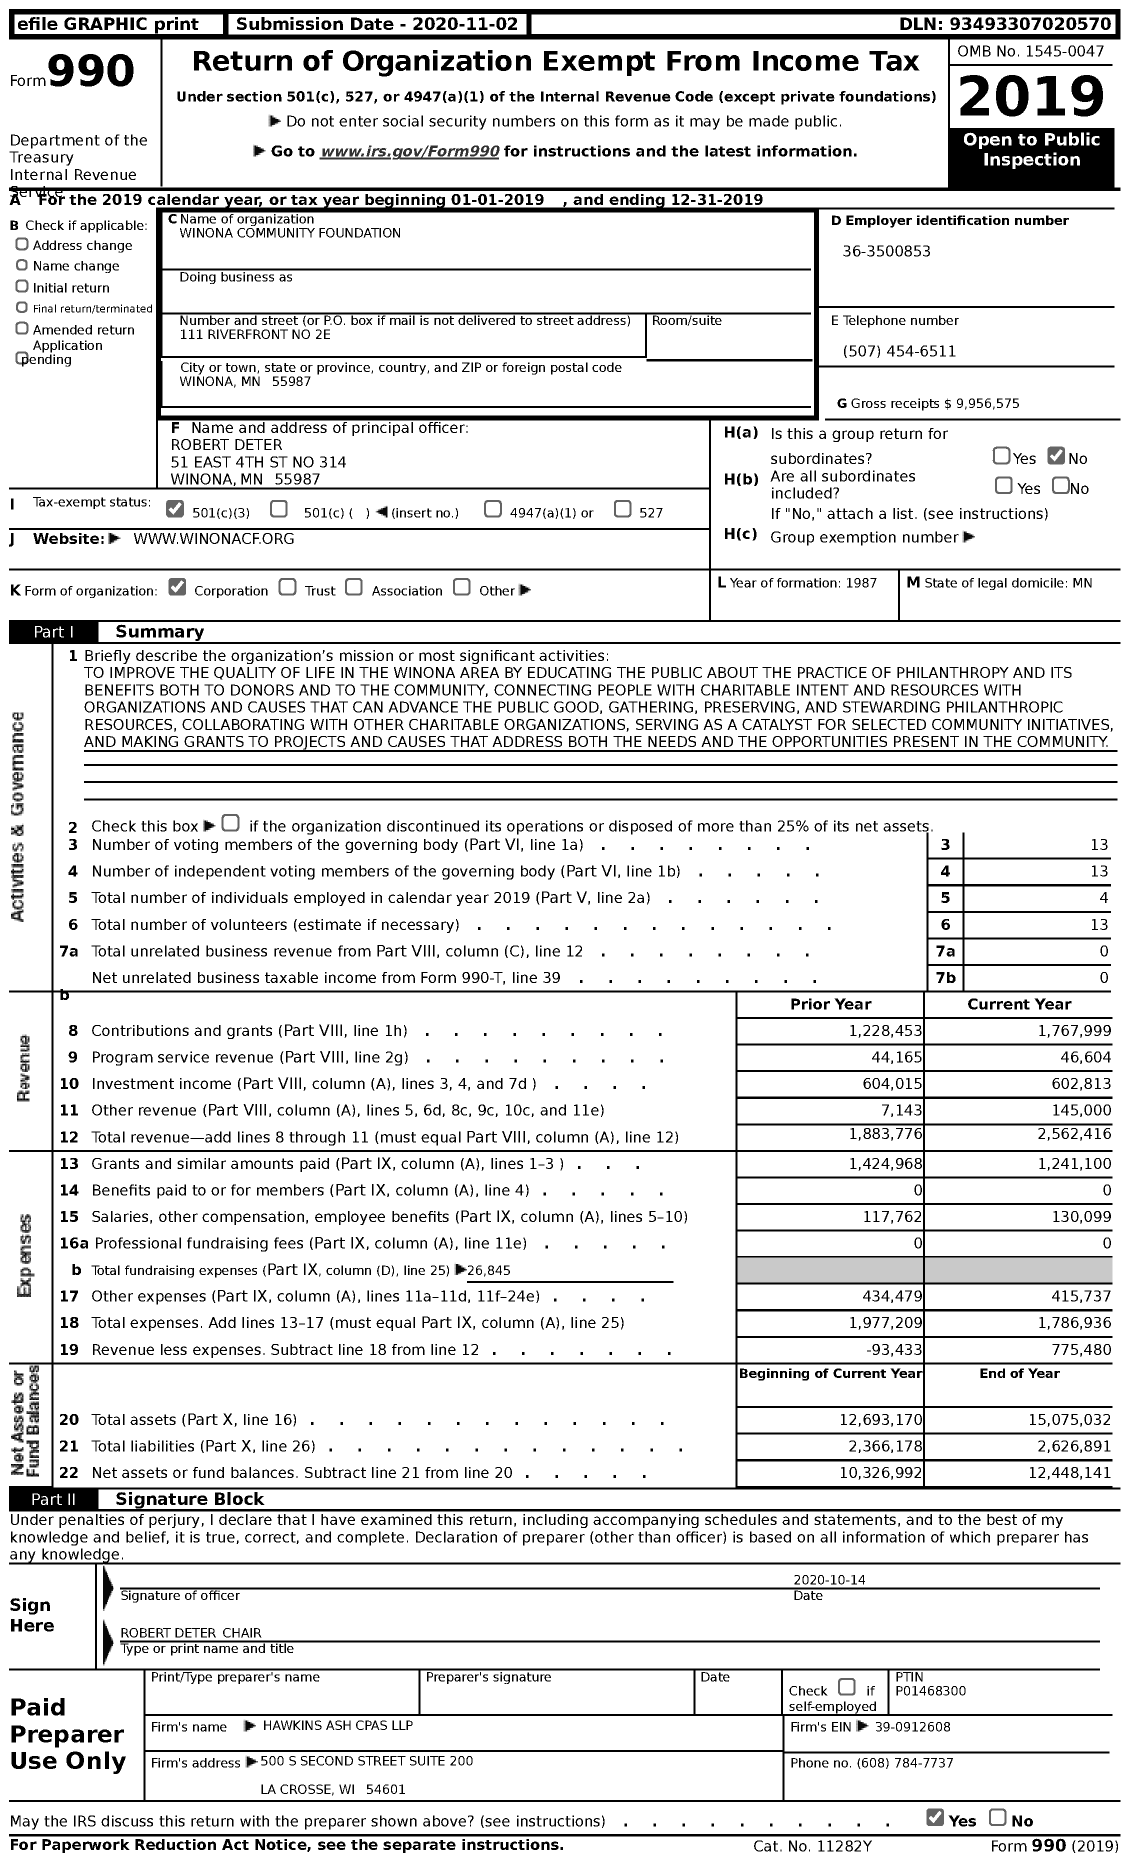 Image of first page of 2019 Form 990 for Winona Community Foundation (WCF)